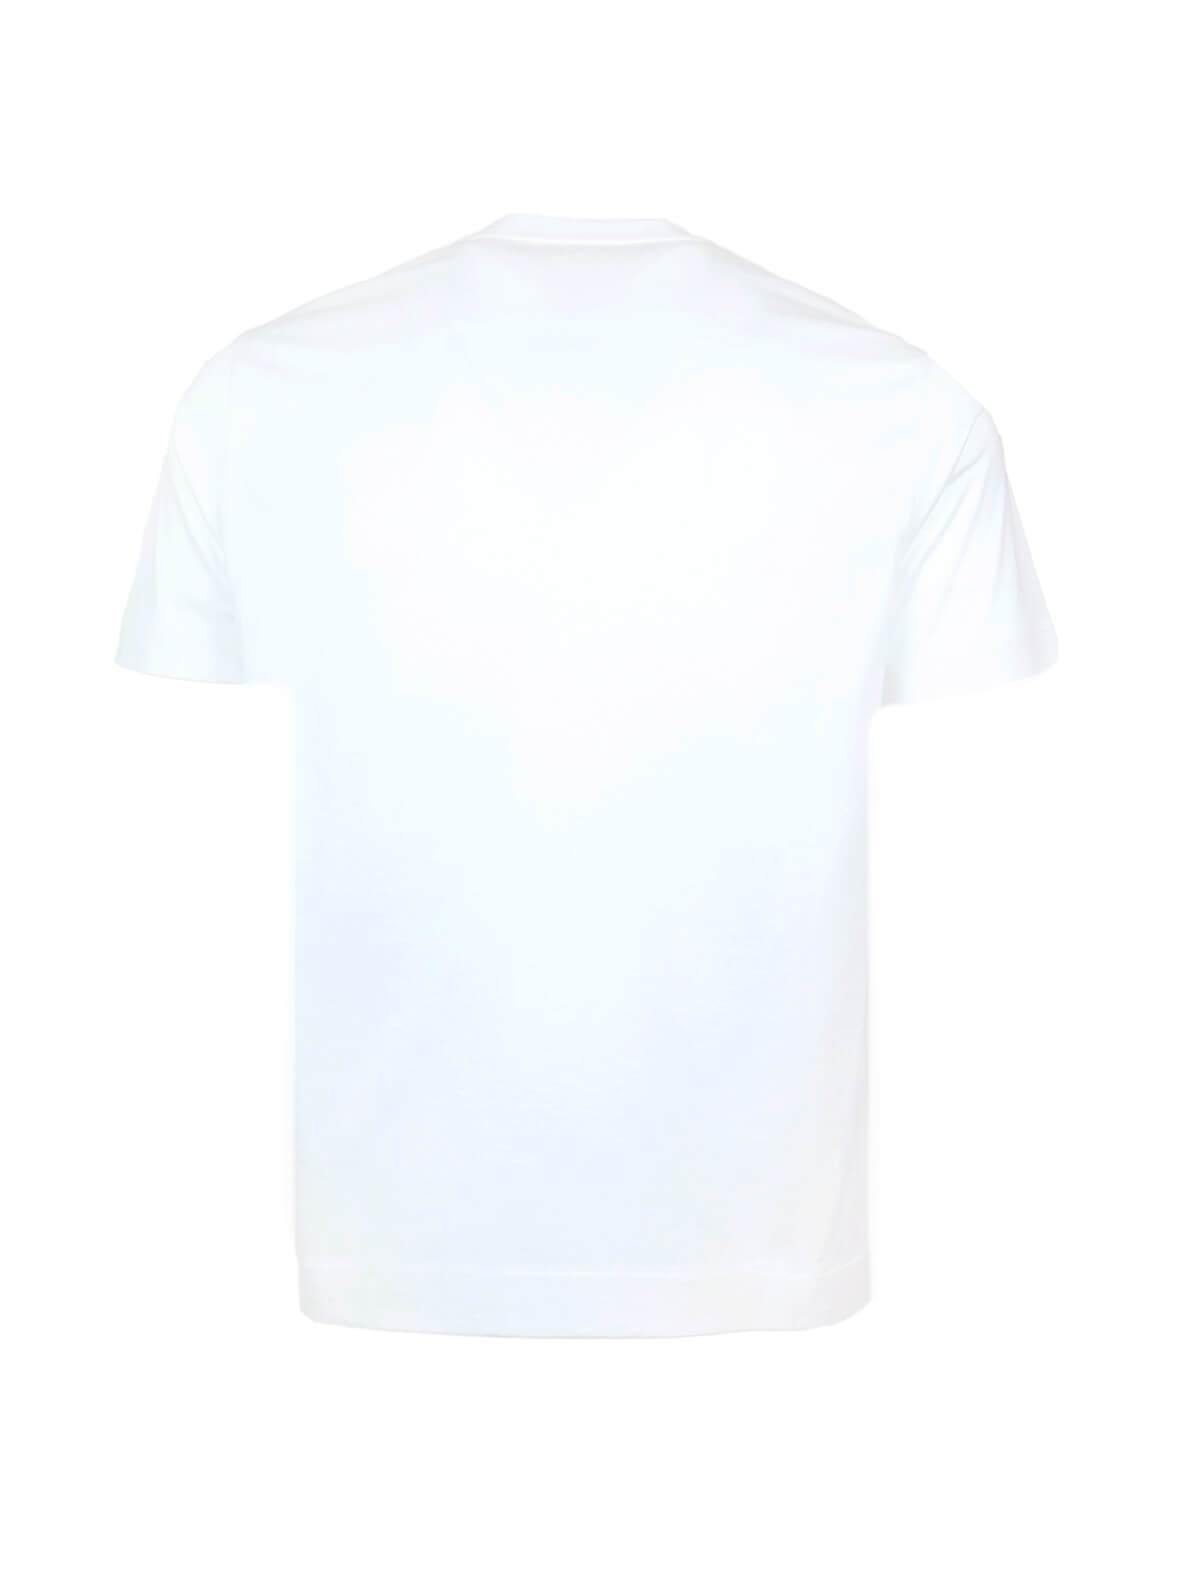 CIRCOLO 1901 Cotton T-Shirt with Front Pocket in White | CLOSET Singapore